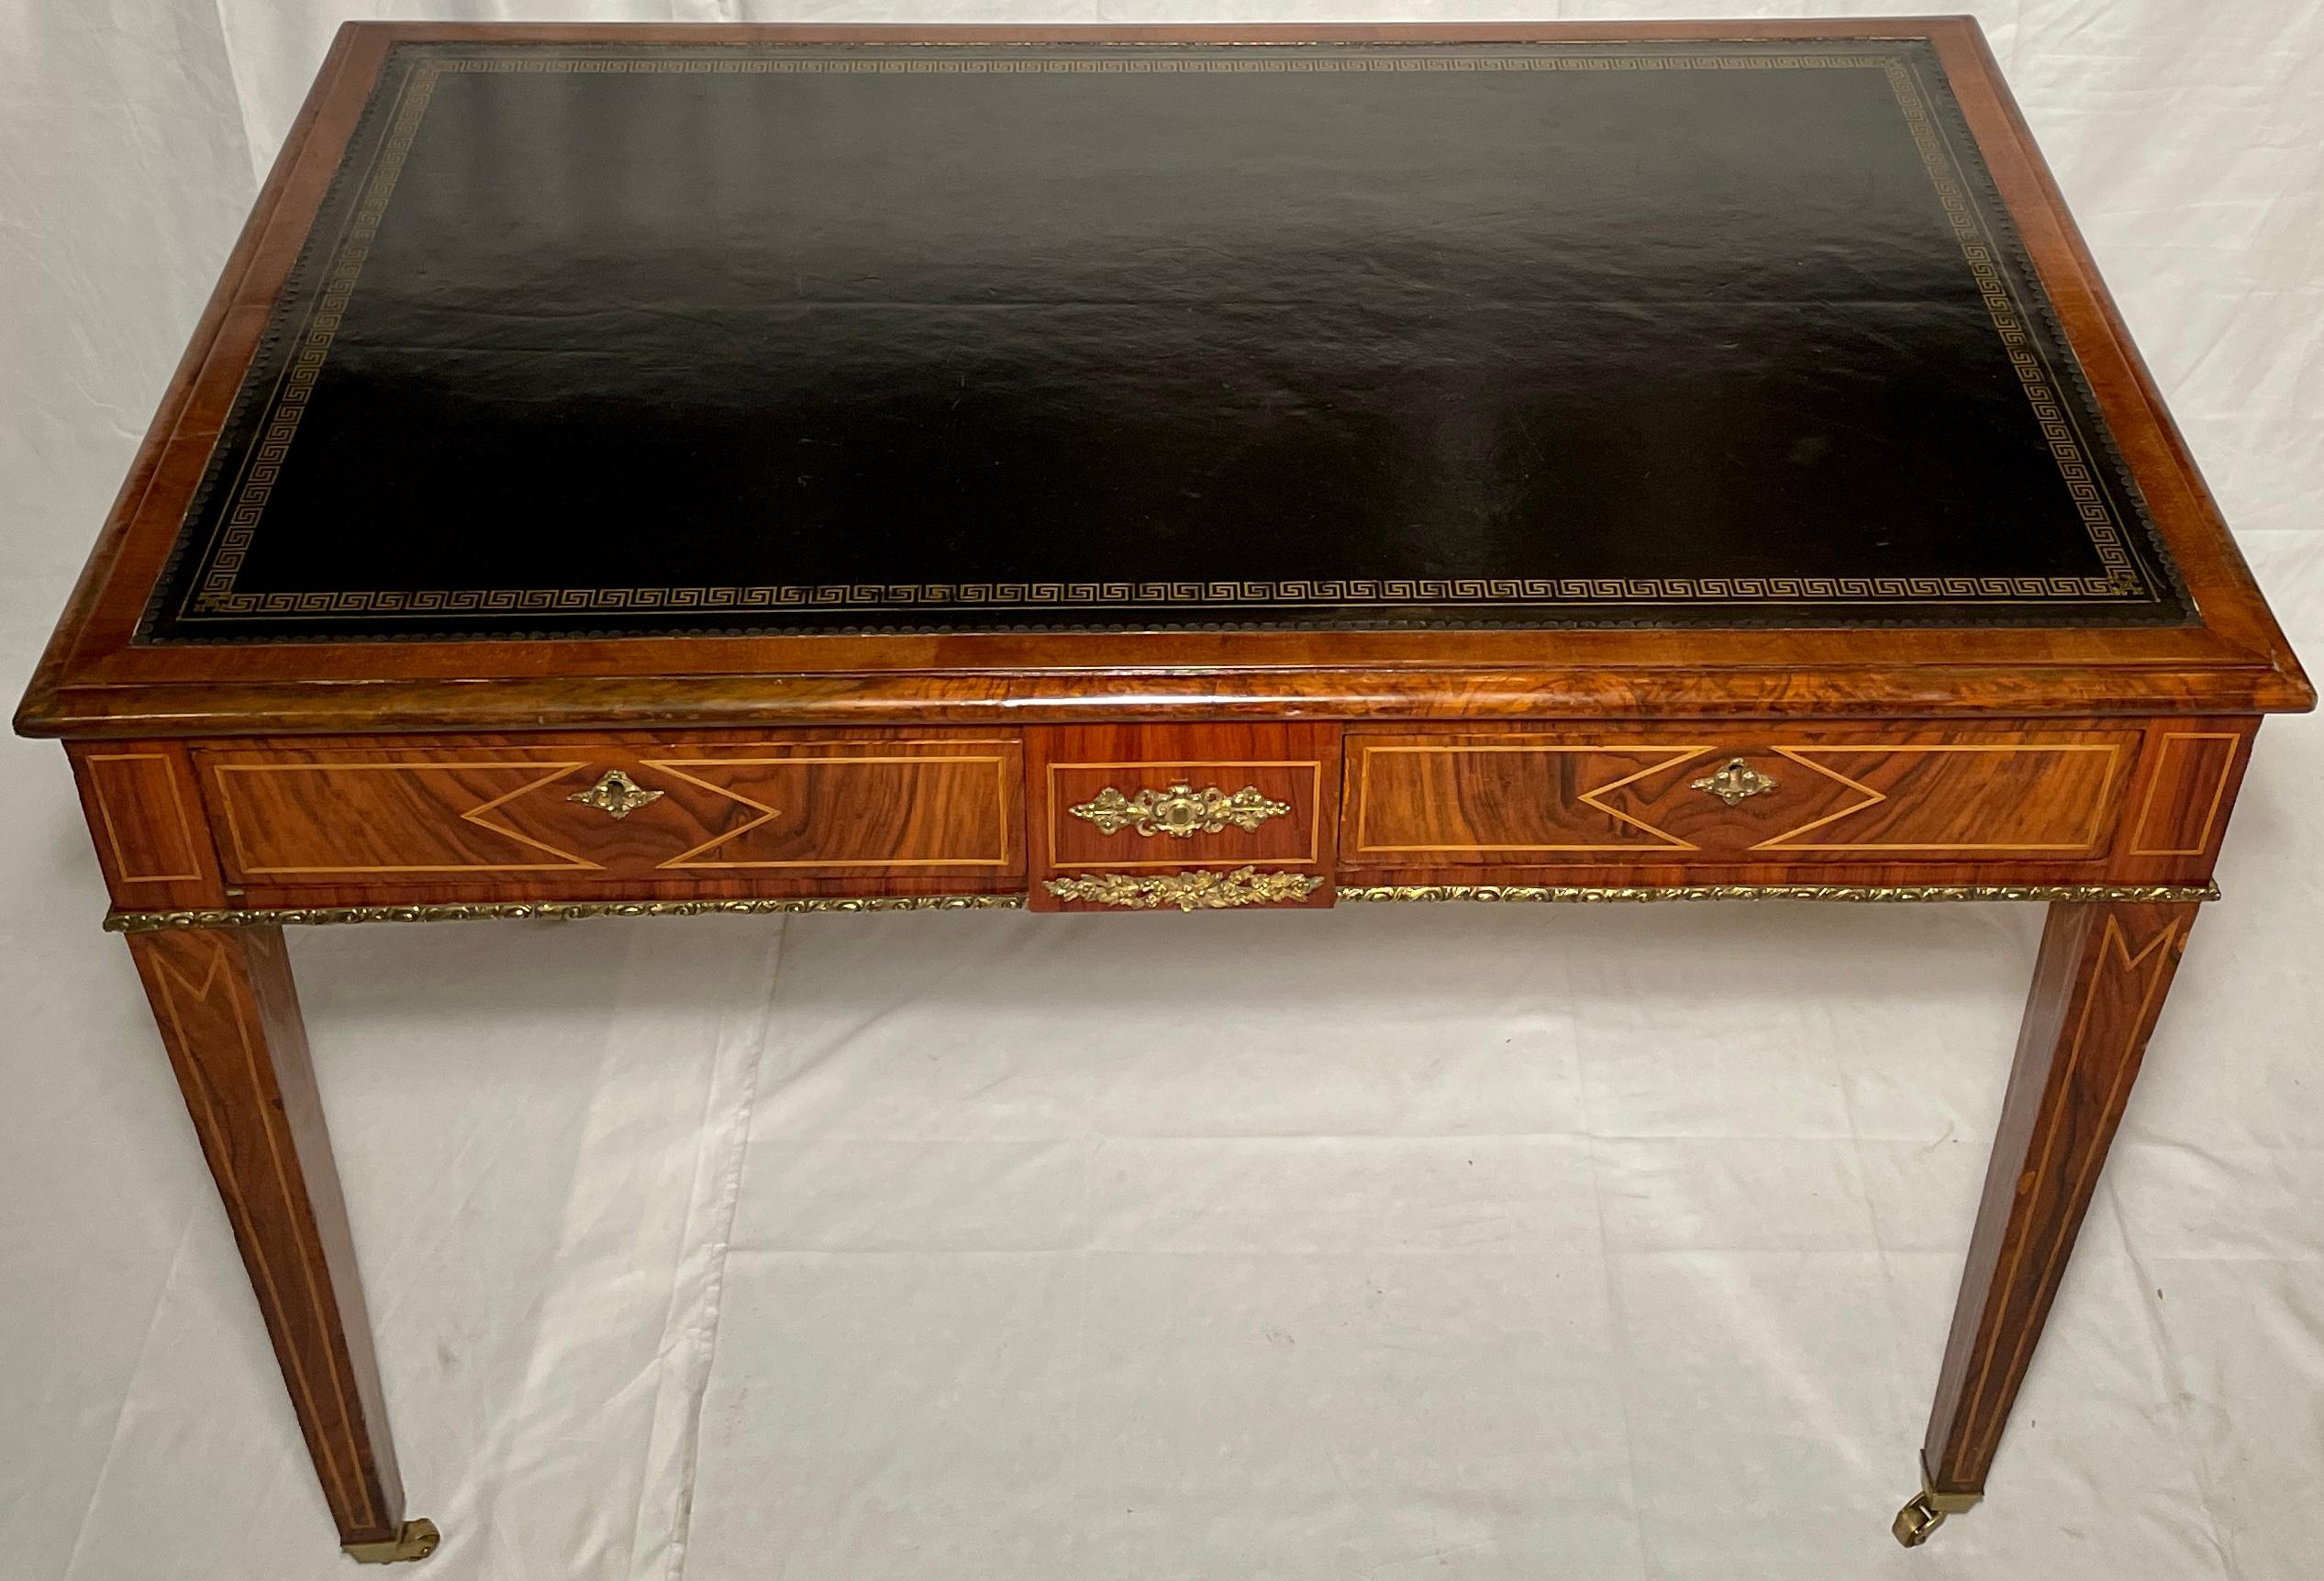 Antique English inlaid walnut and gold bronze mounted writing desk with black leather top, Circa 1880.